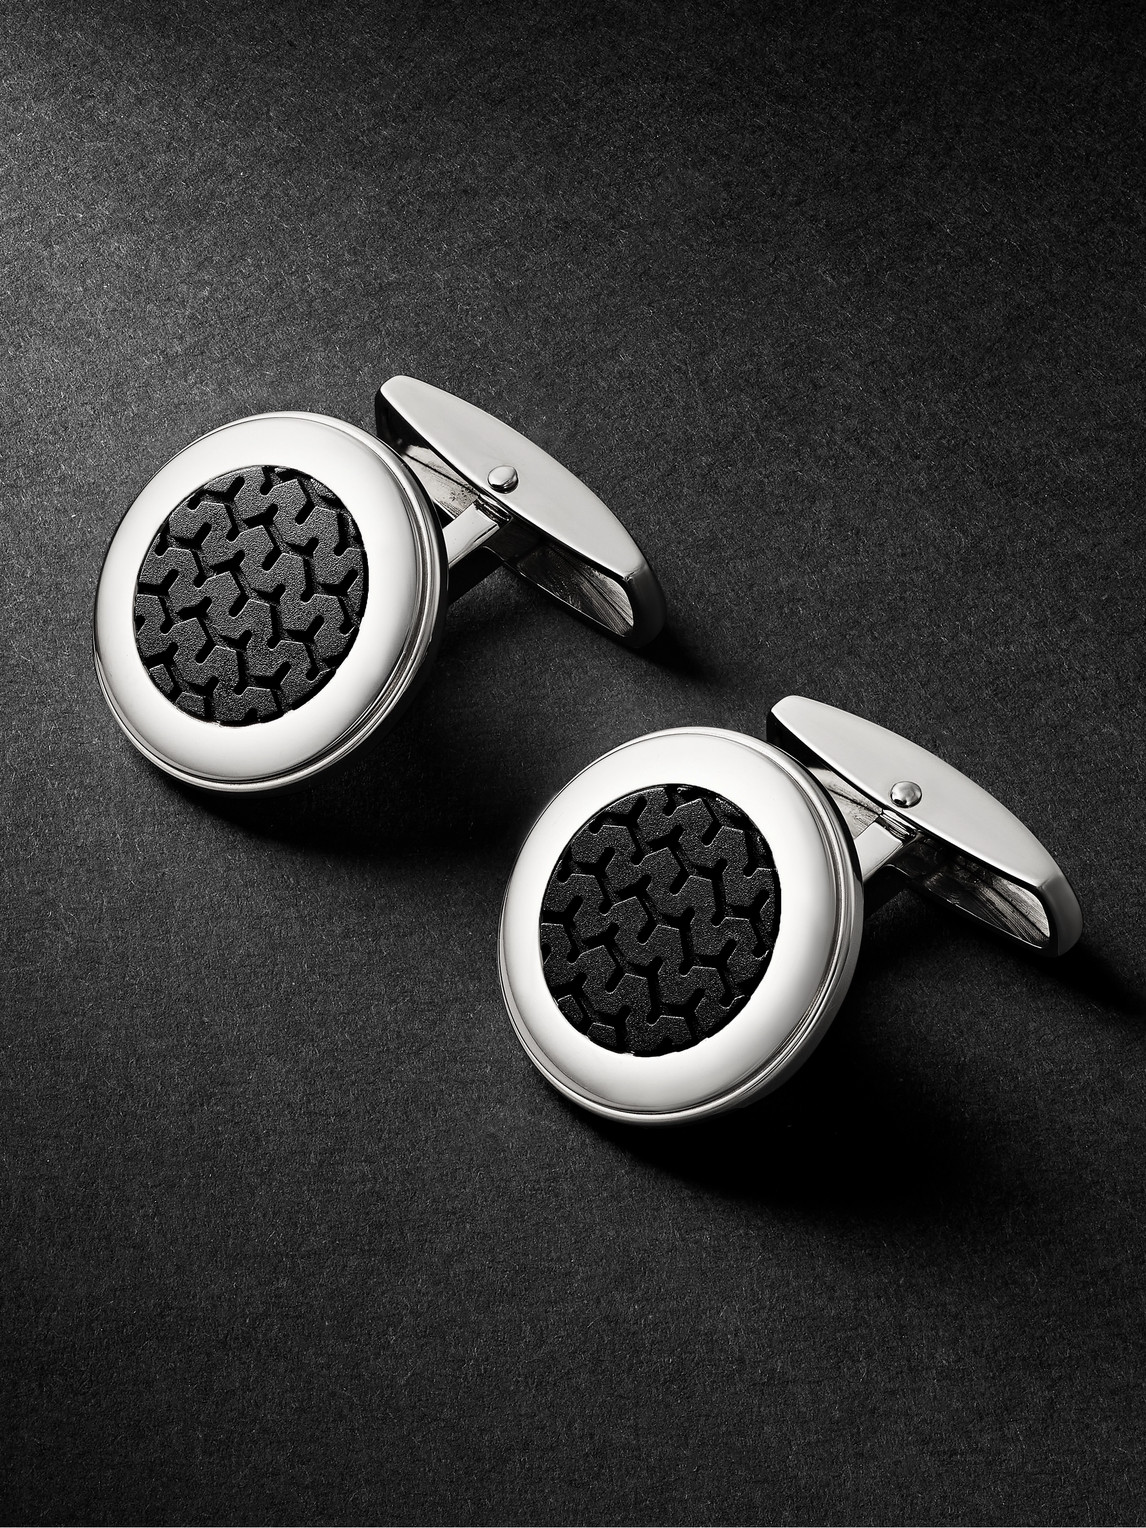 Chopard Mille Miglia Stainless Steel and Rubber Cufflinks